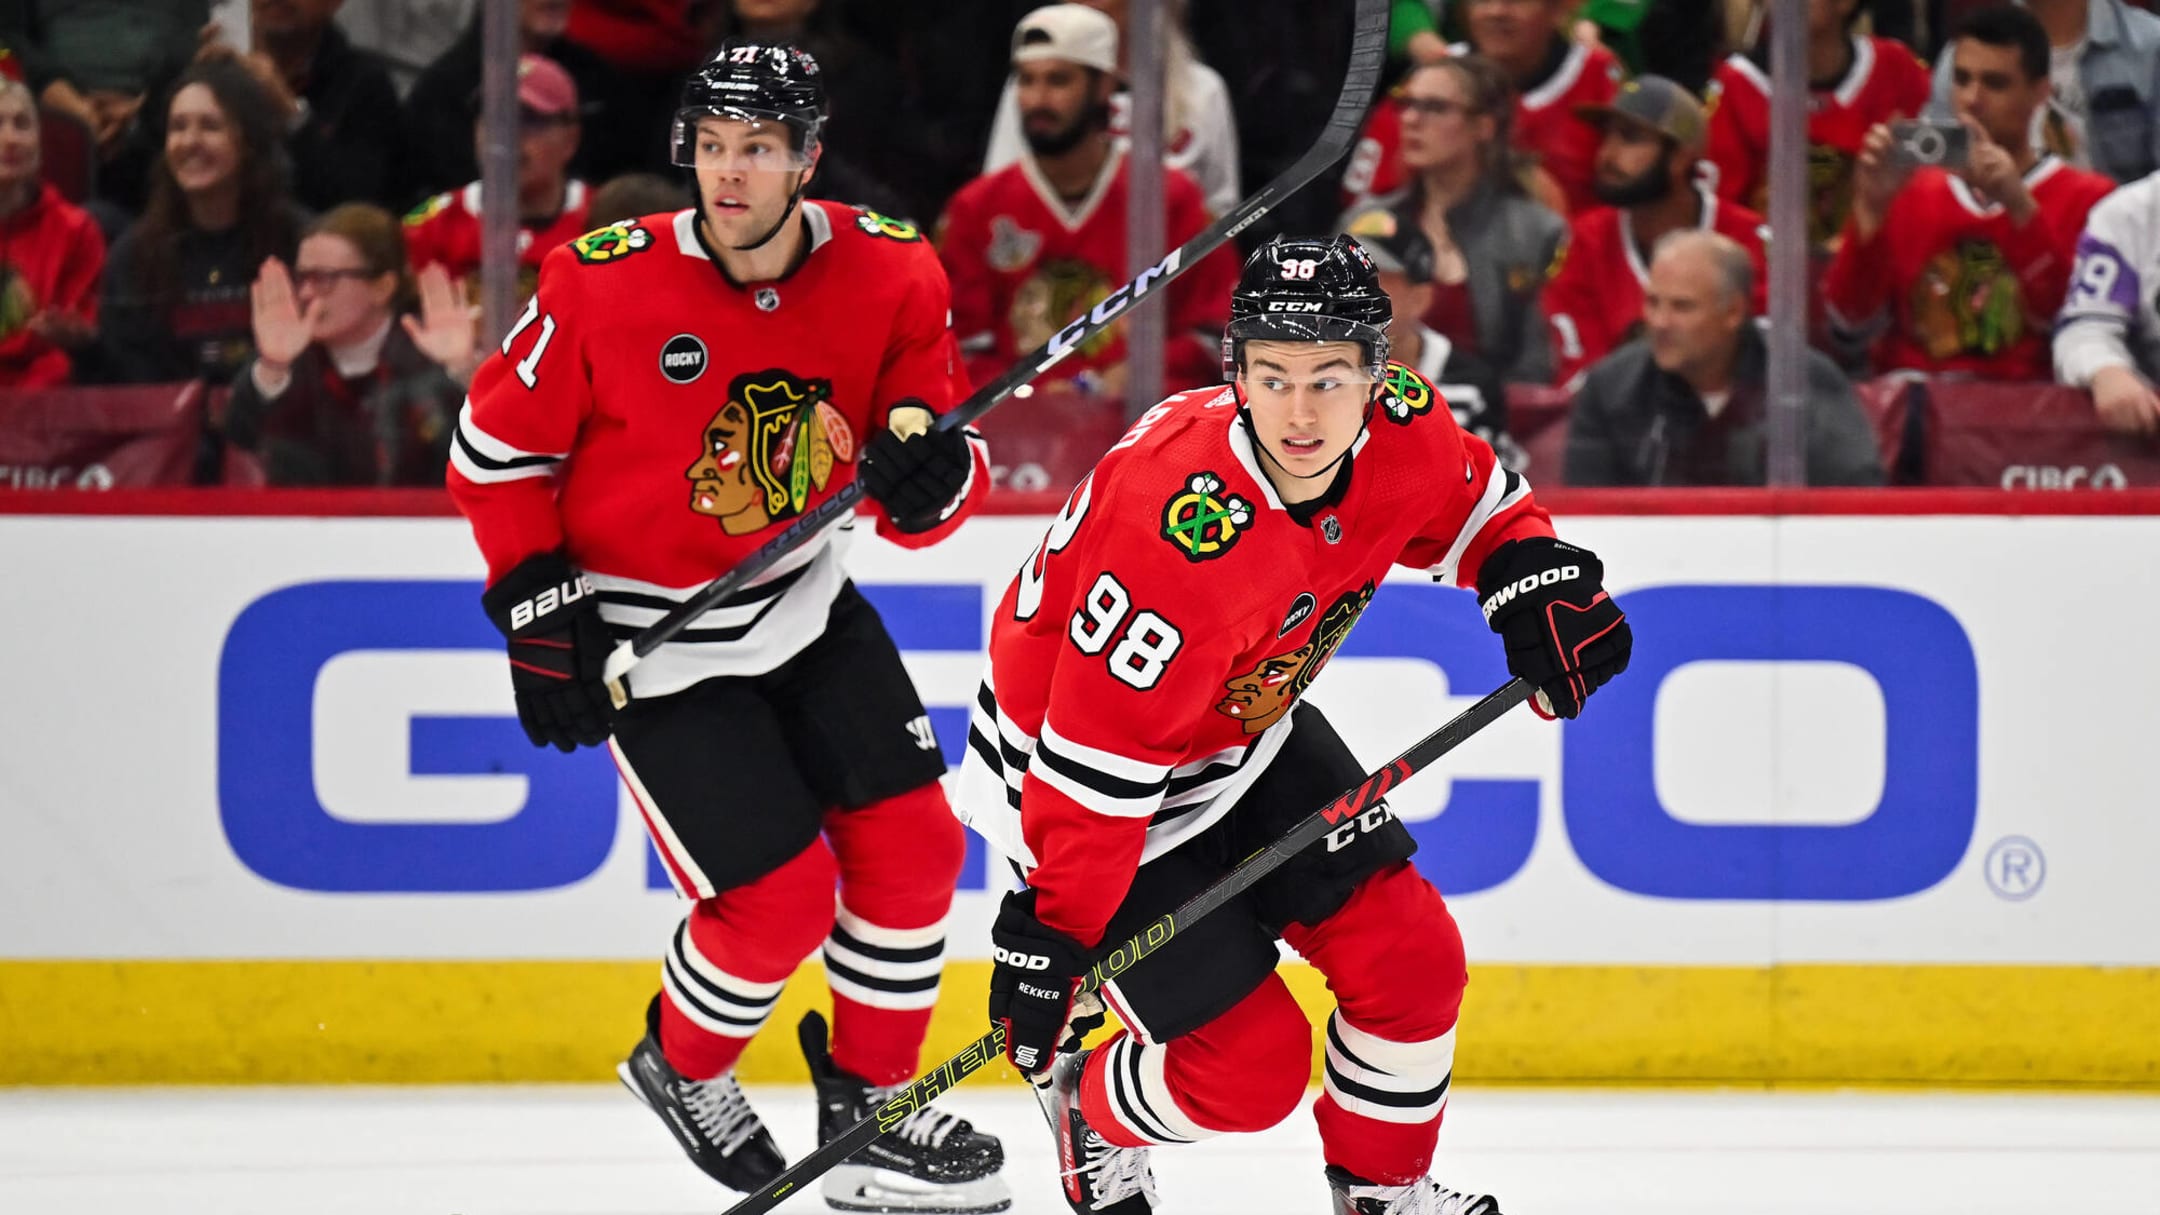 Blackhawks Beat Red Wings to Stay Alive - The New York Times